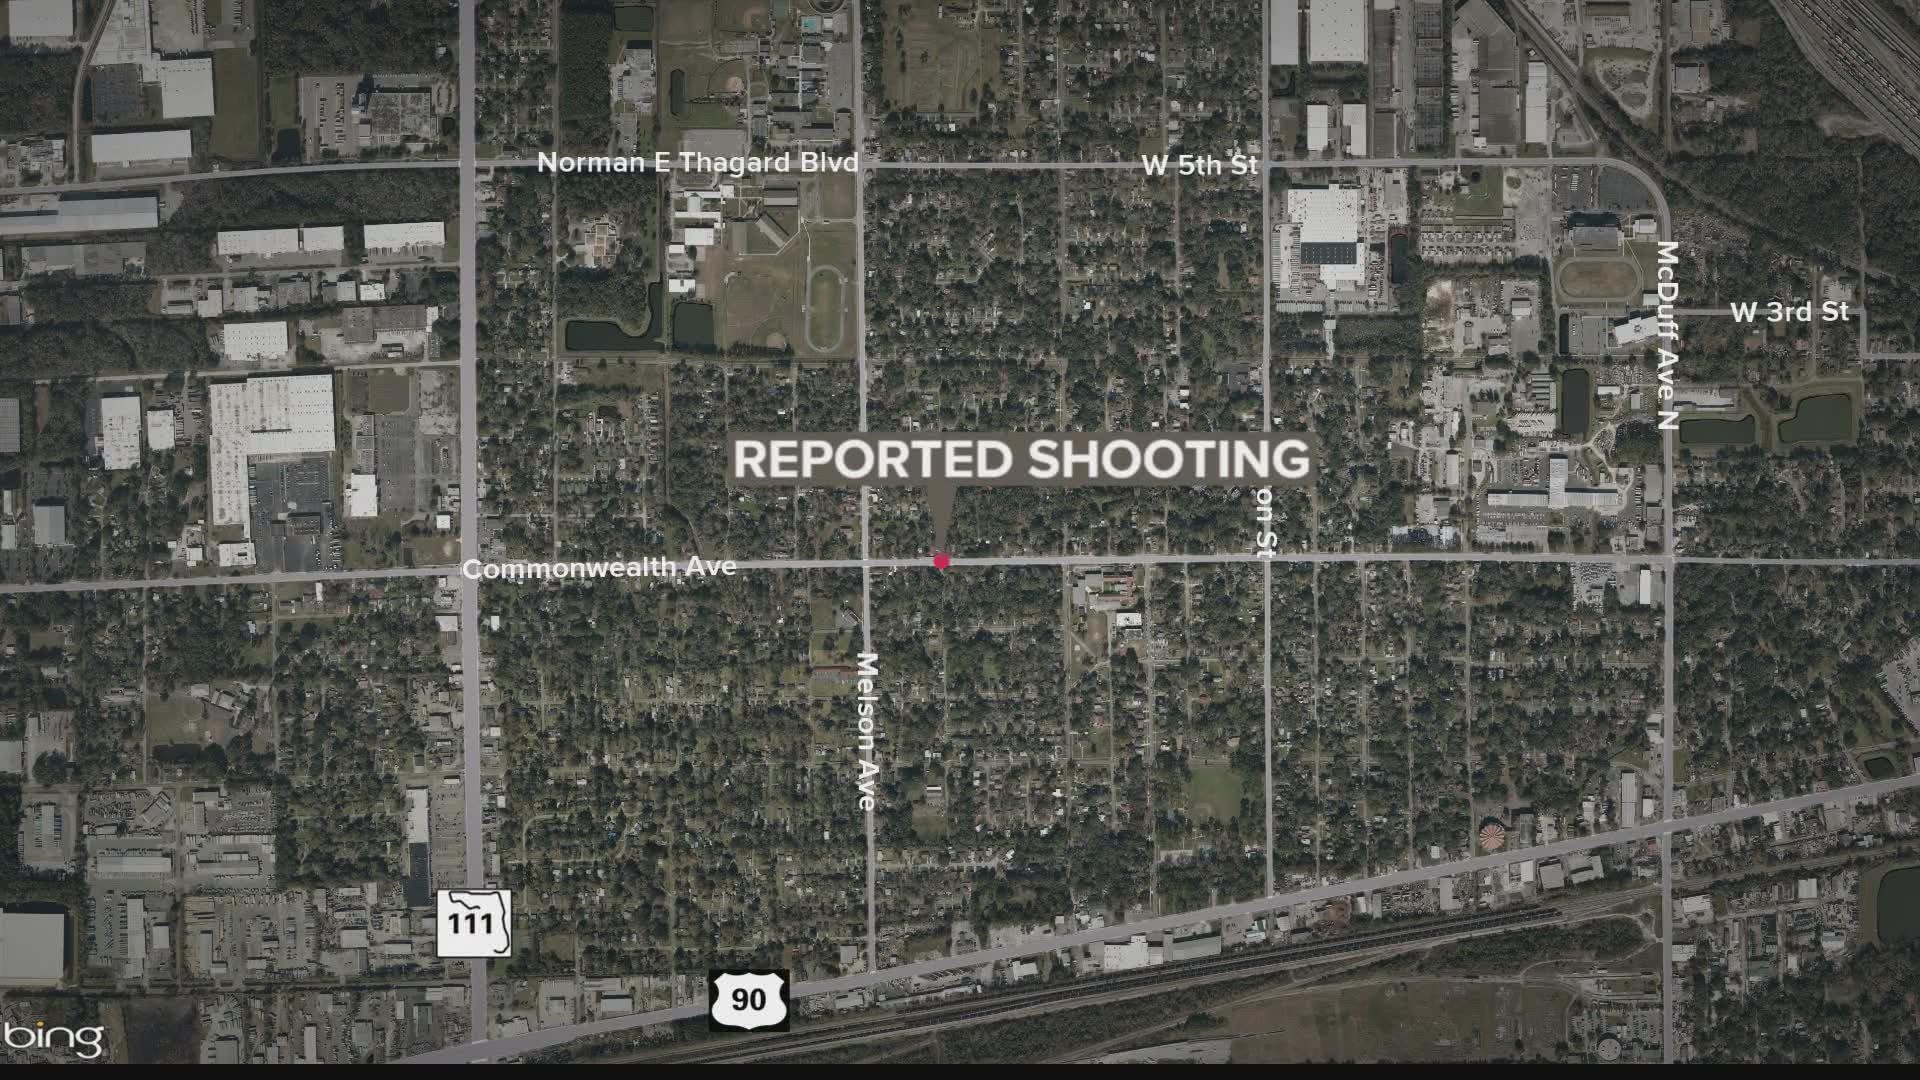 A woman is dead following a shooting in Jacksonville's Woodstock area Friday night, according to the Jacksonville Sheriff's Office.